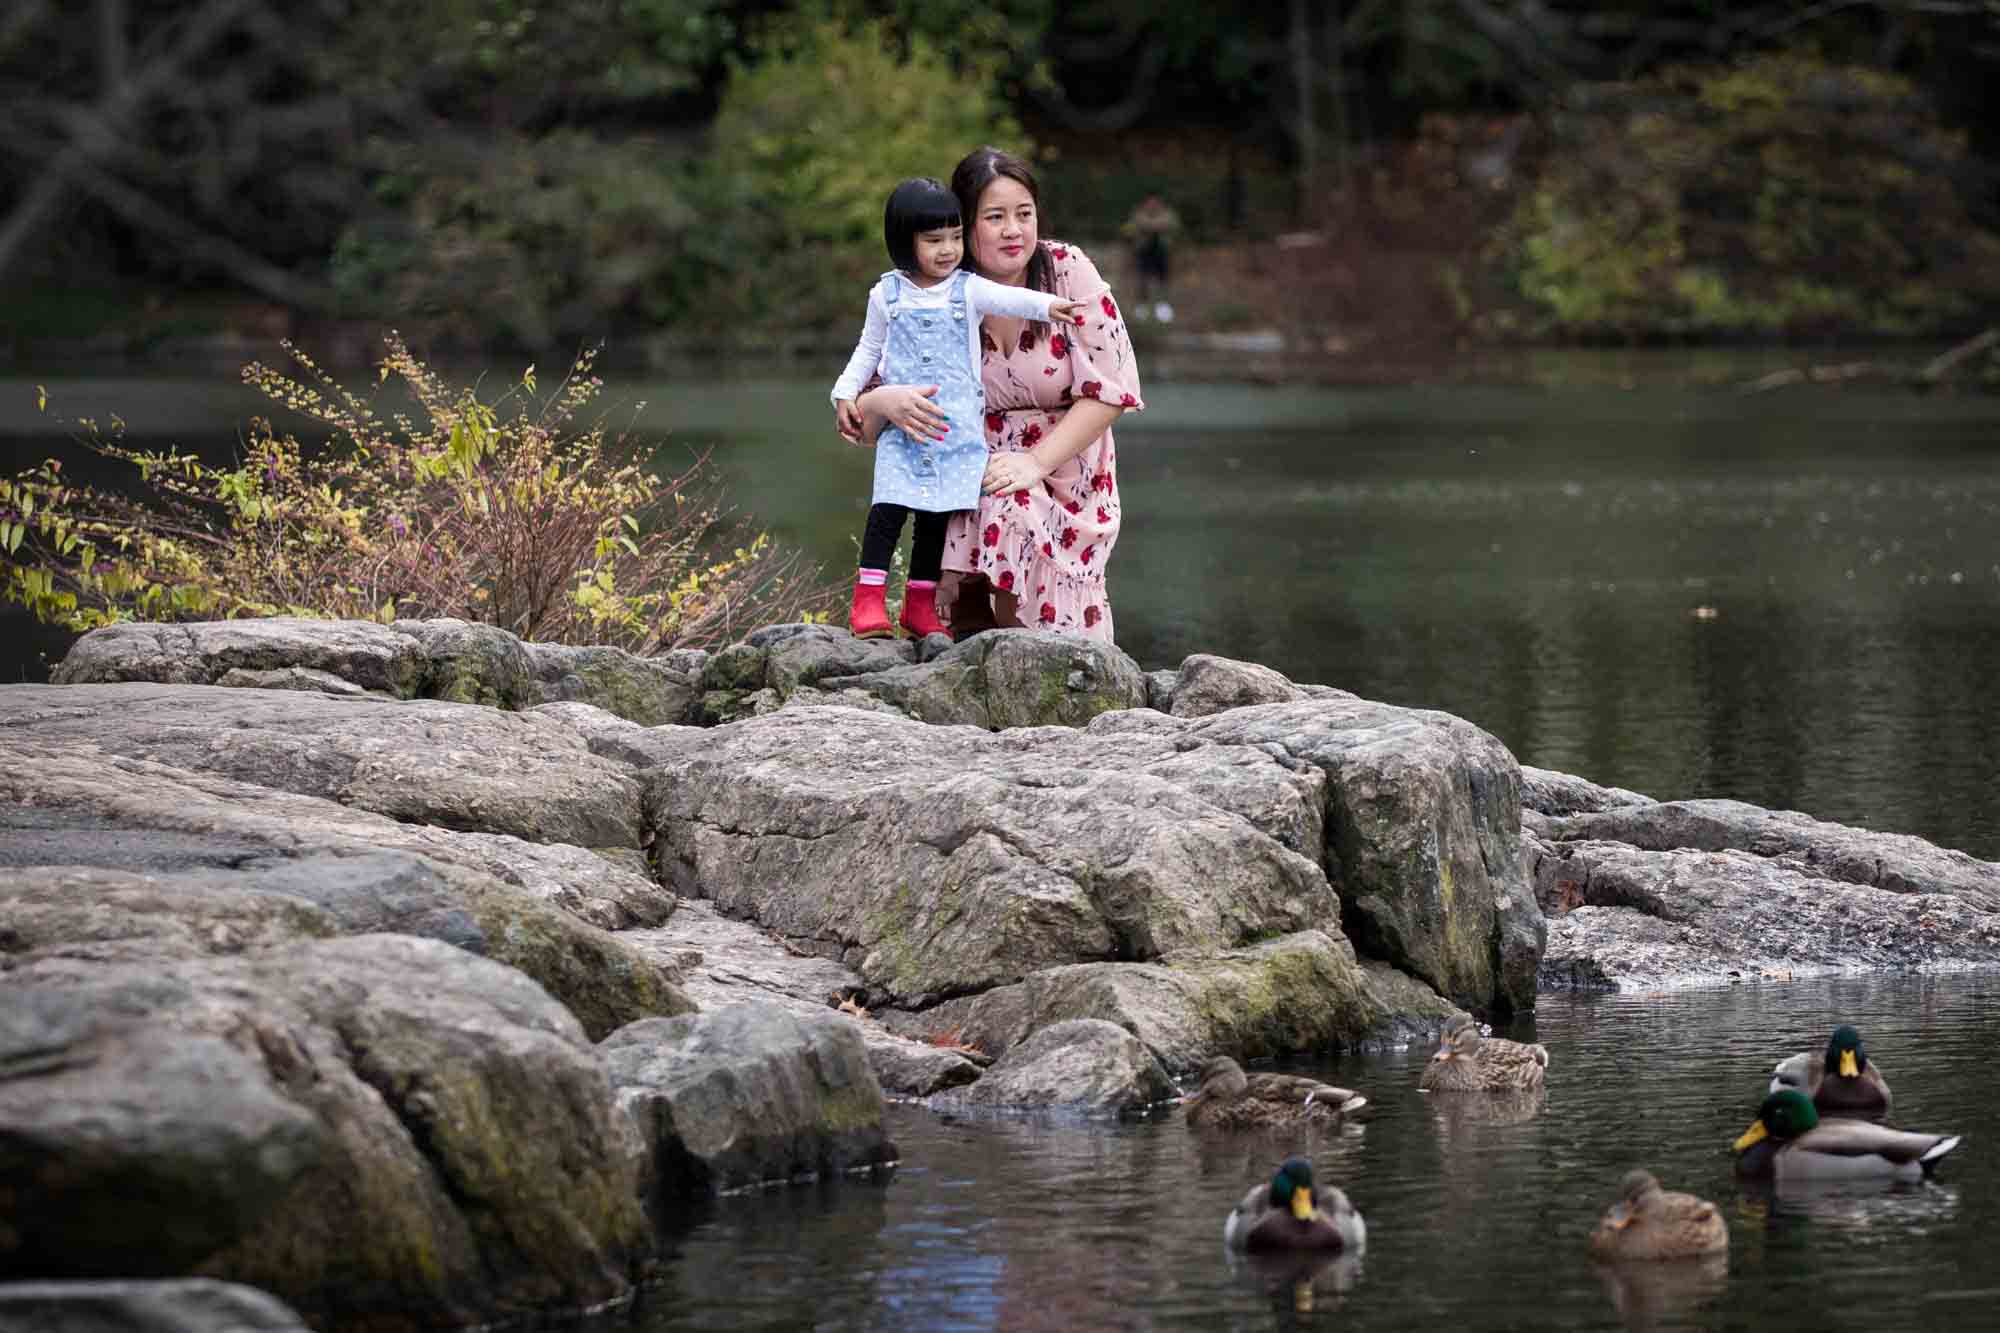 Mother pointing out ducks to little girl along lake for an article on Central Park winter portrait tips